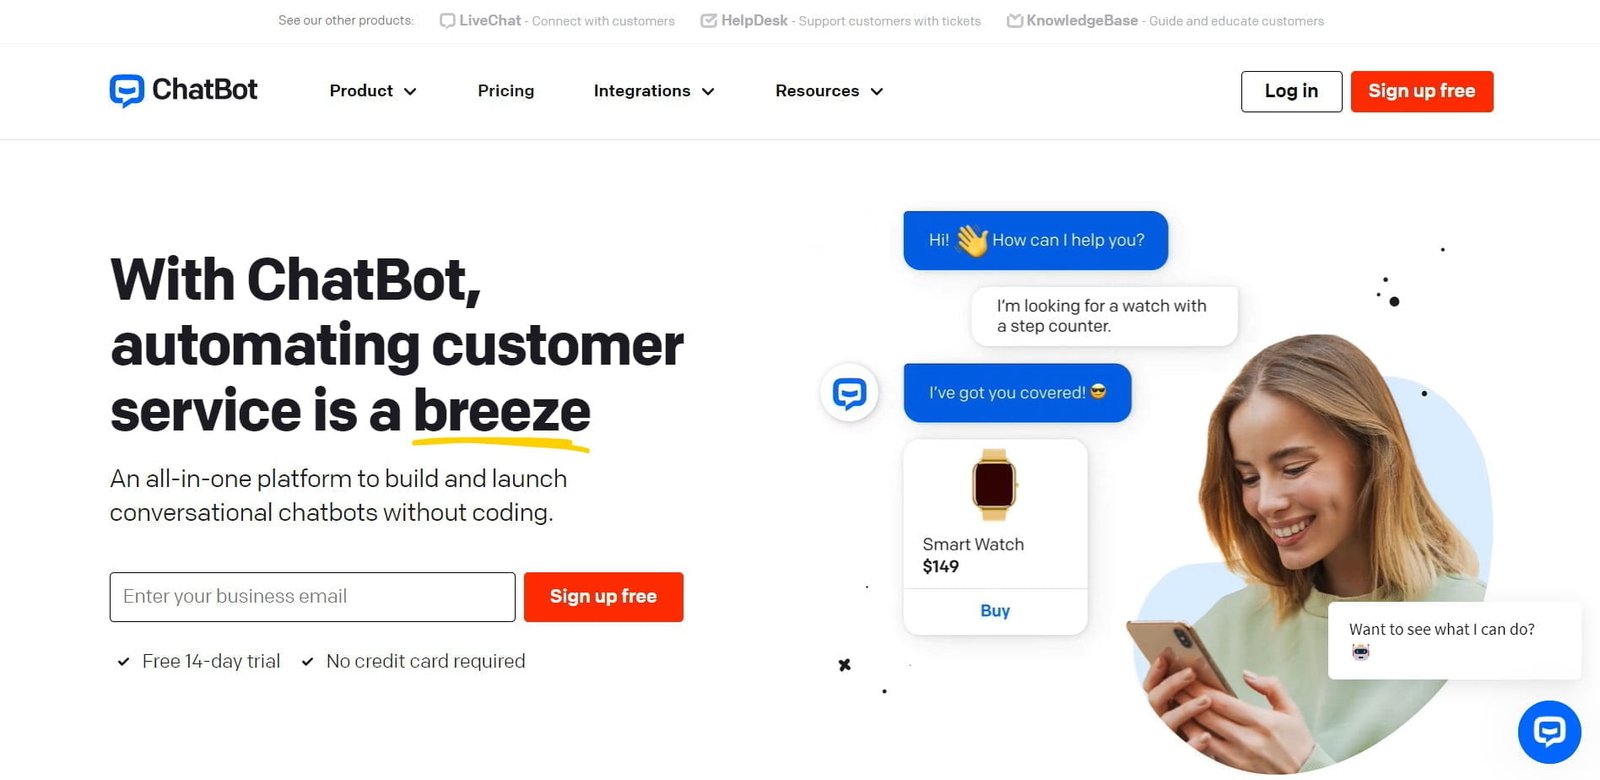 Chatbot.com is a powerful AI-driven chatbot platform that allows businesses to automate customer service